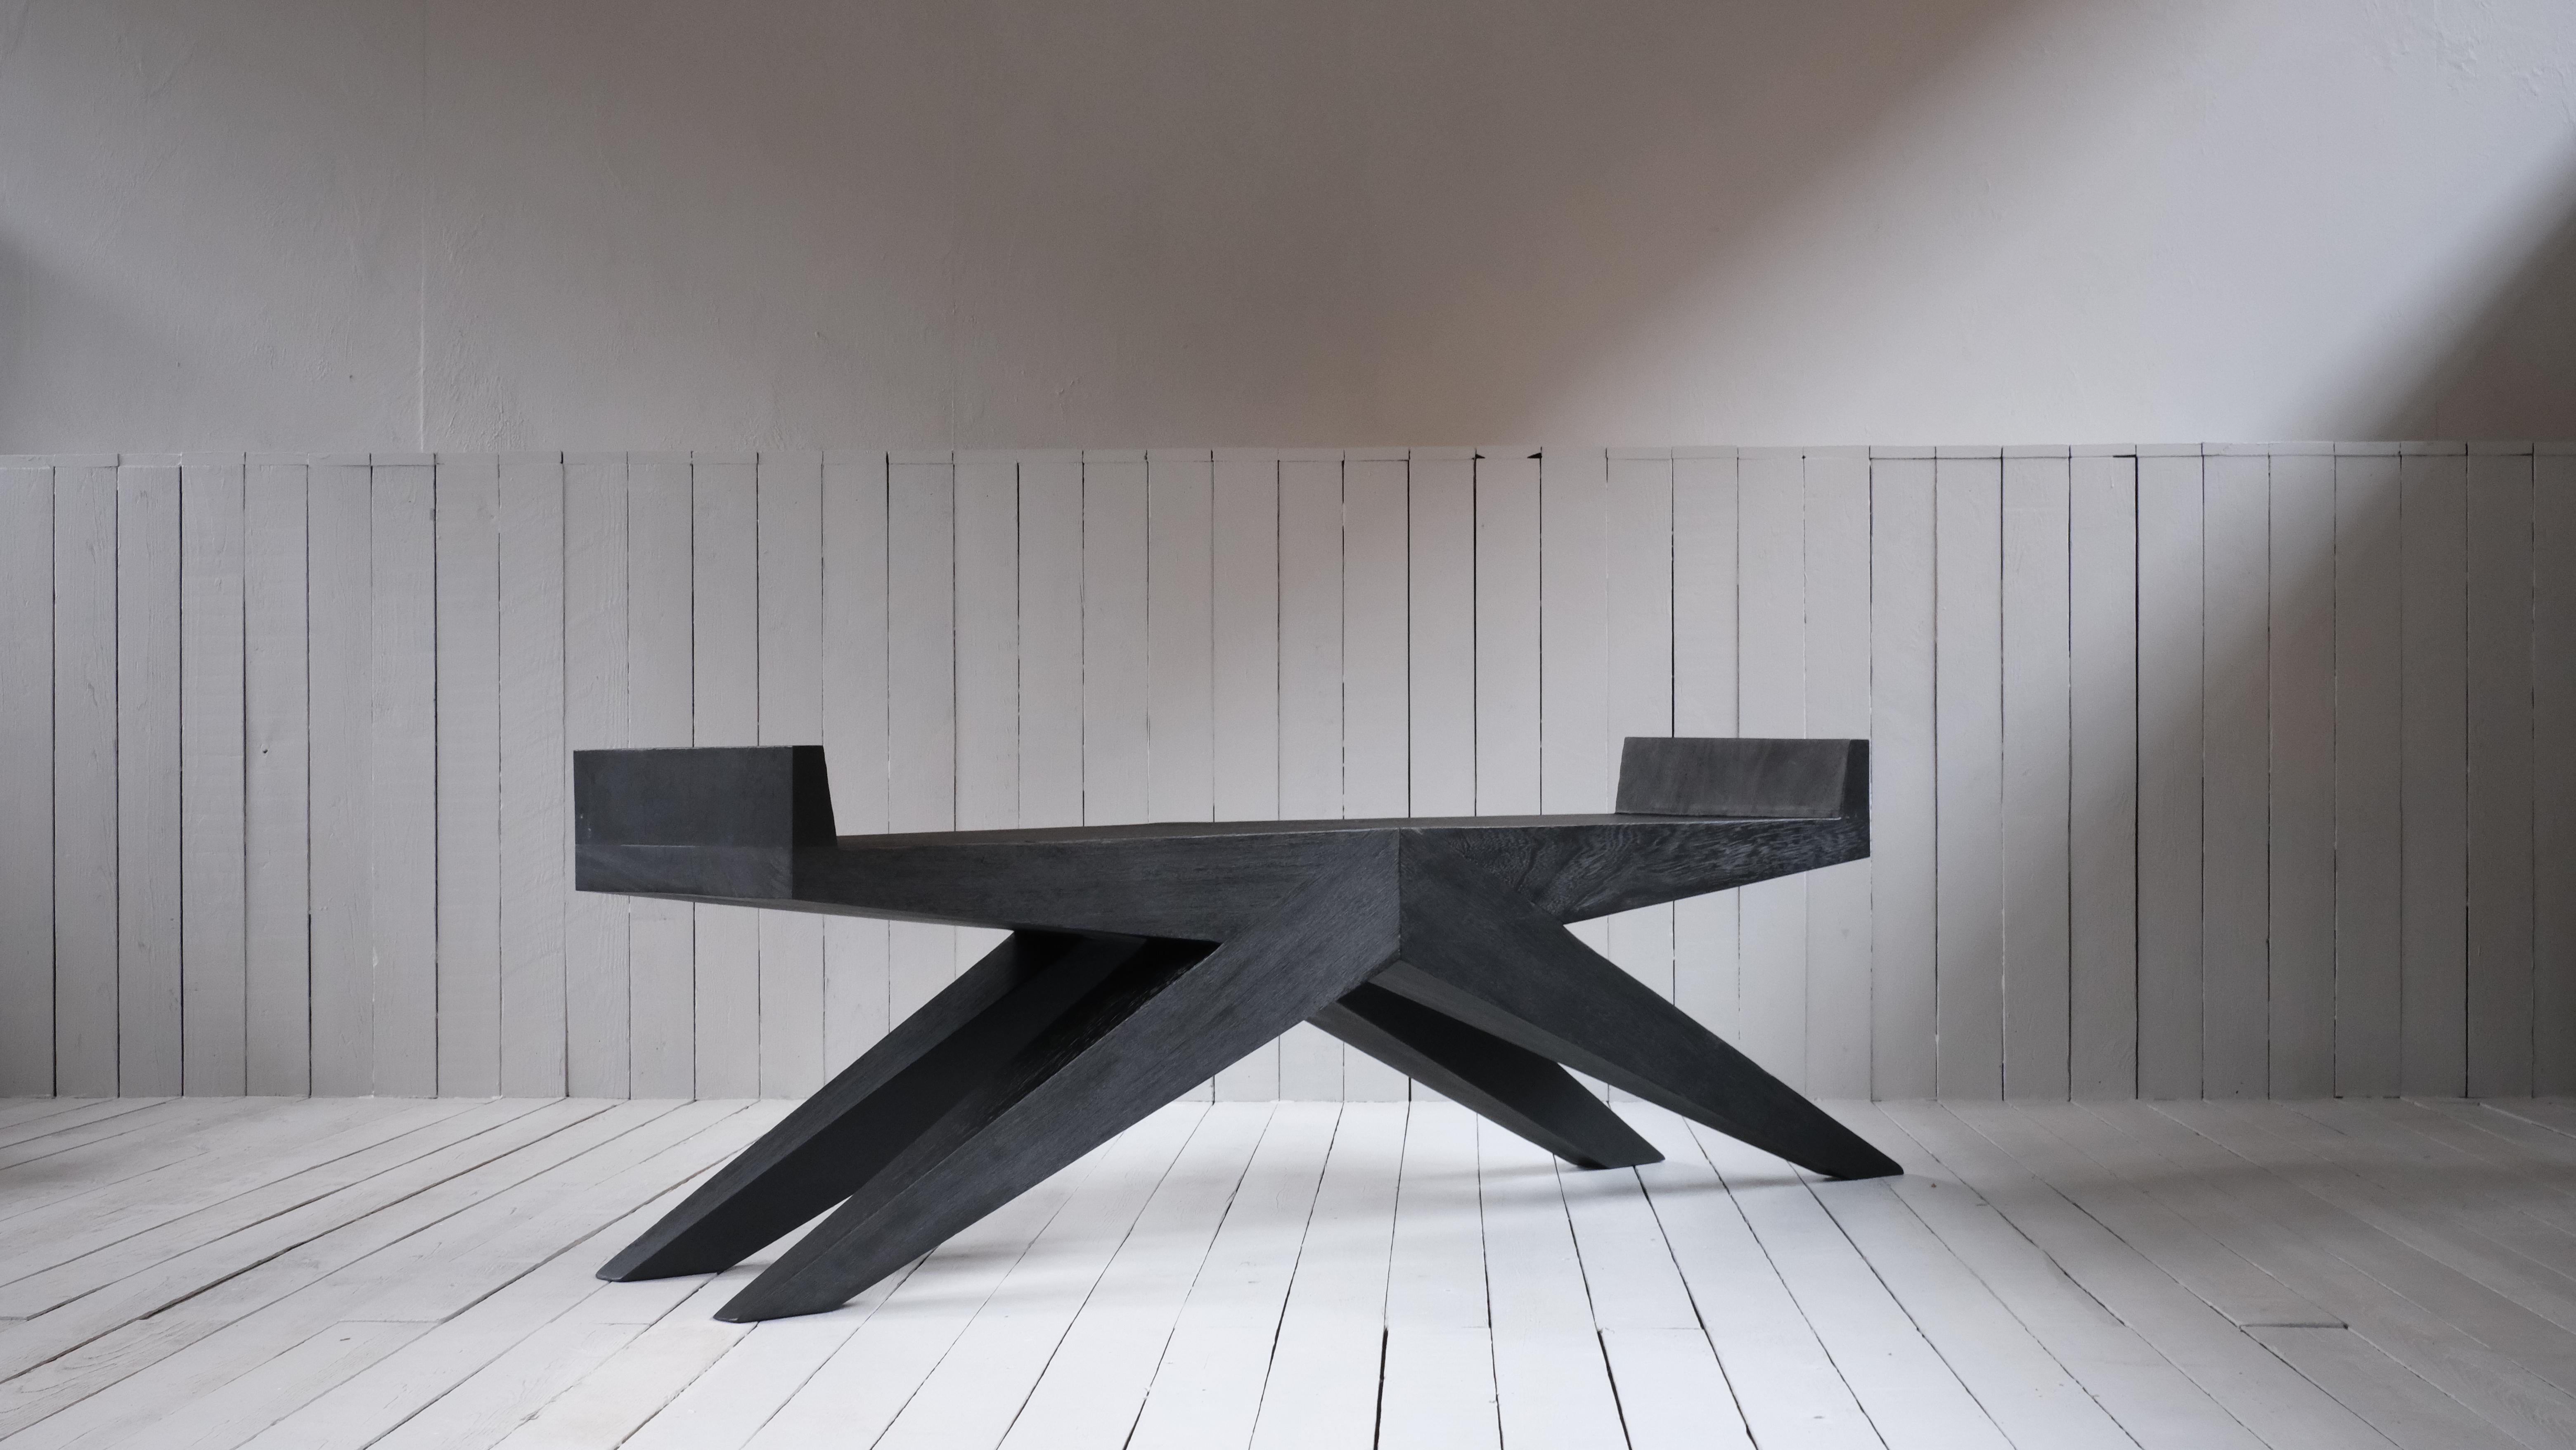 V-bench in Iroko wood by Arno Declercq
Dimensions: W 180 x D 38 x H 55 cm 
Materials: burned and waxed Iroko wood

Arno Declercq
Belgian designer and art dealer who makes bespoke objects with passion for design, atmosphere, history and craft.